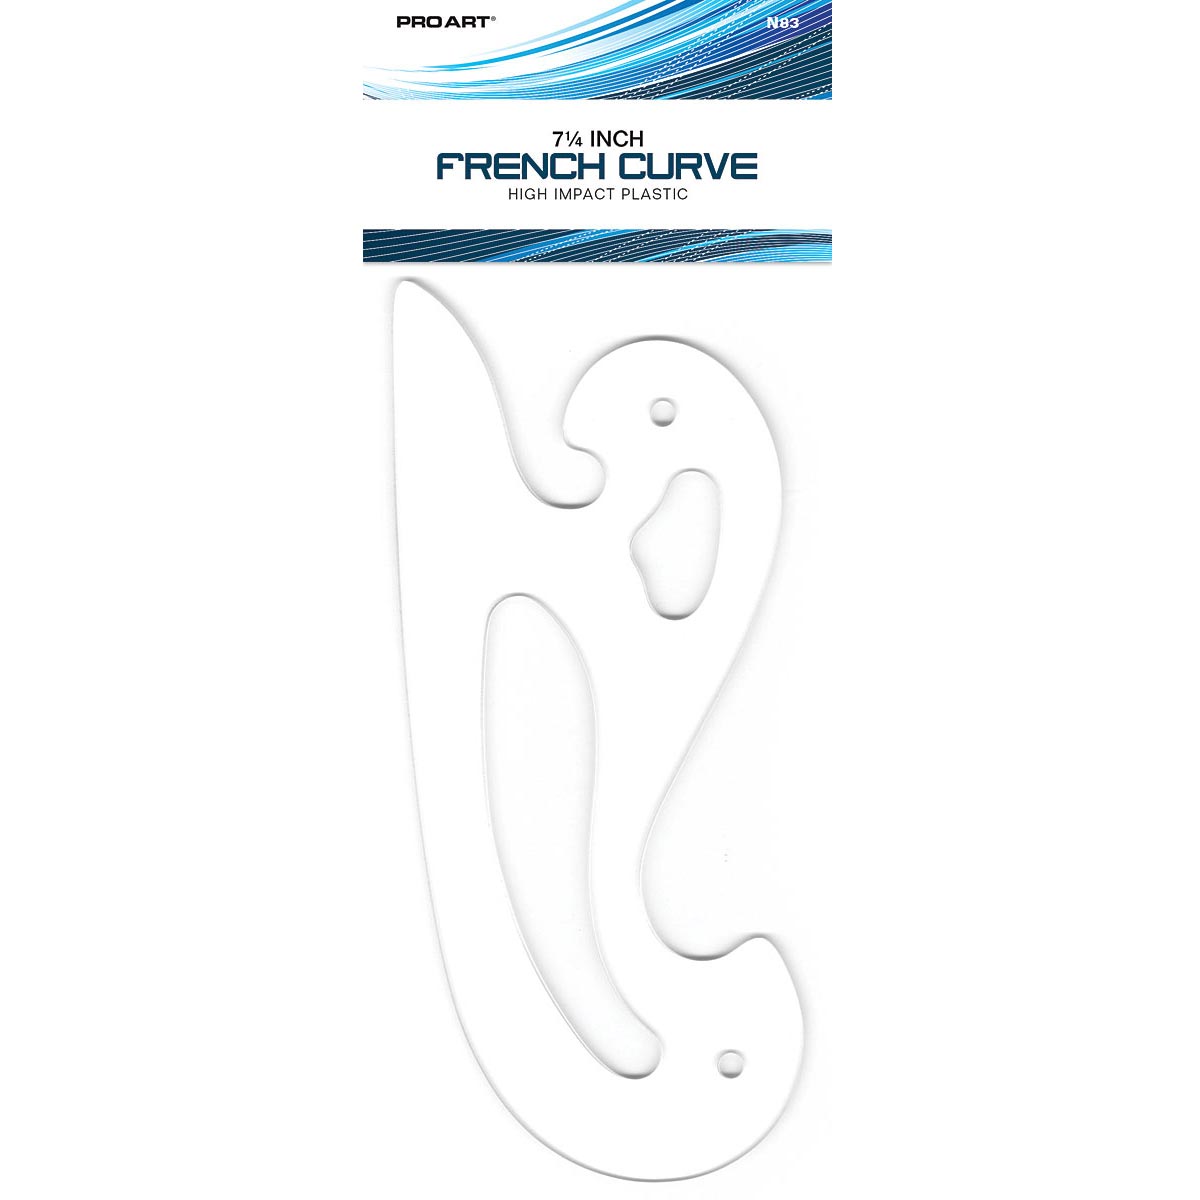 French Curve 7-1/4 inch by Pro Art